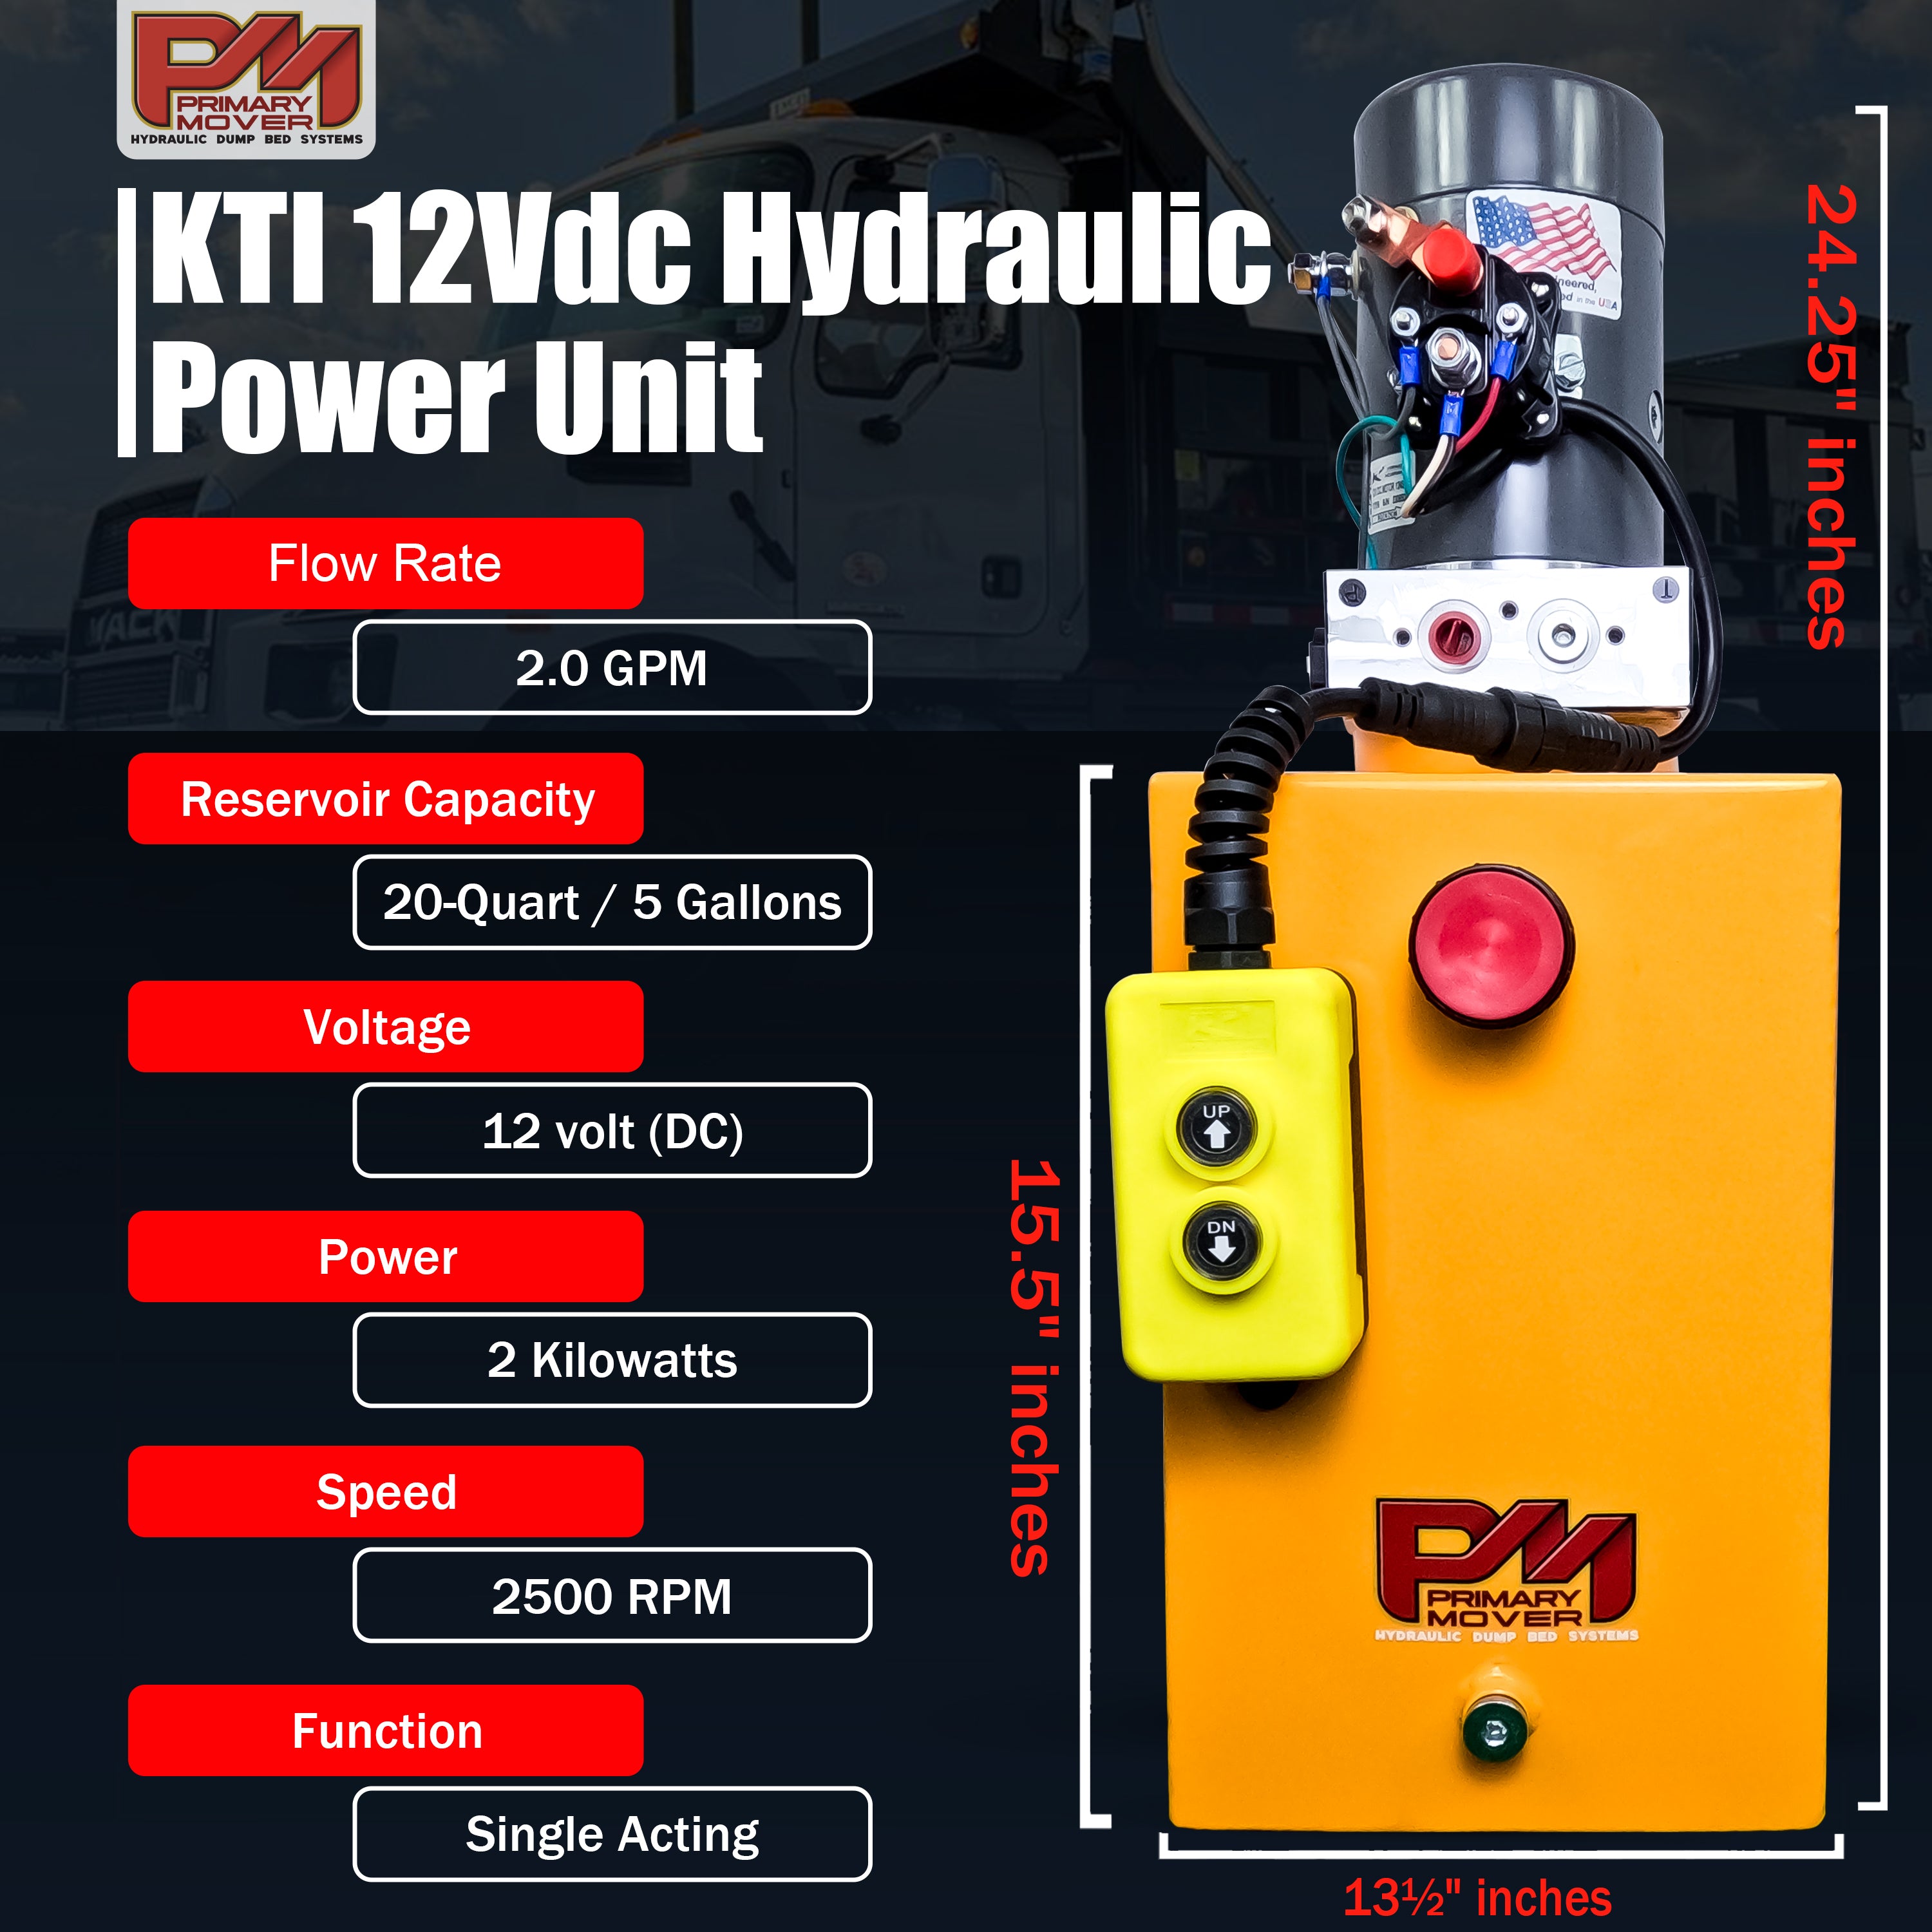 KTI 12V Single-Acting Hydraulic Pump - Steel Reservoir with control buttons and a compact, durable design for efficient hydraulic dump bed operations.